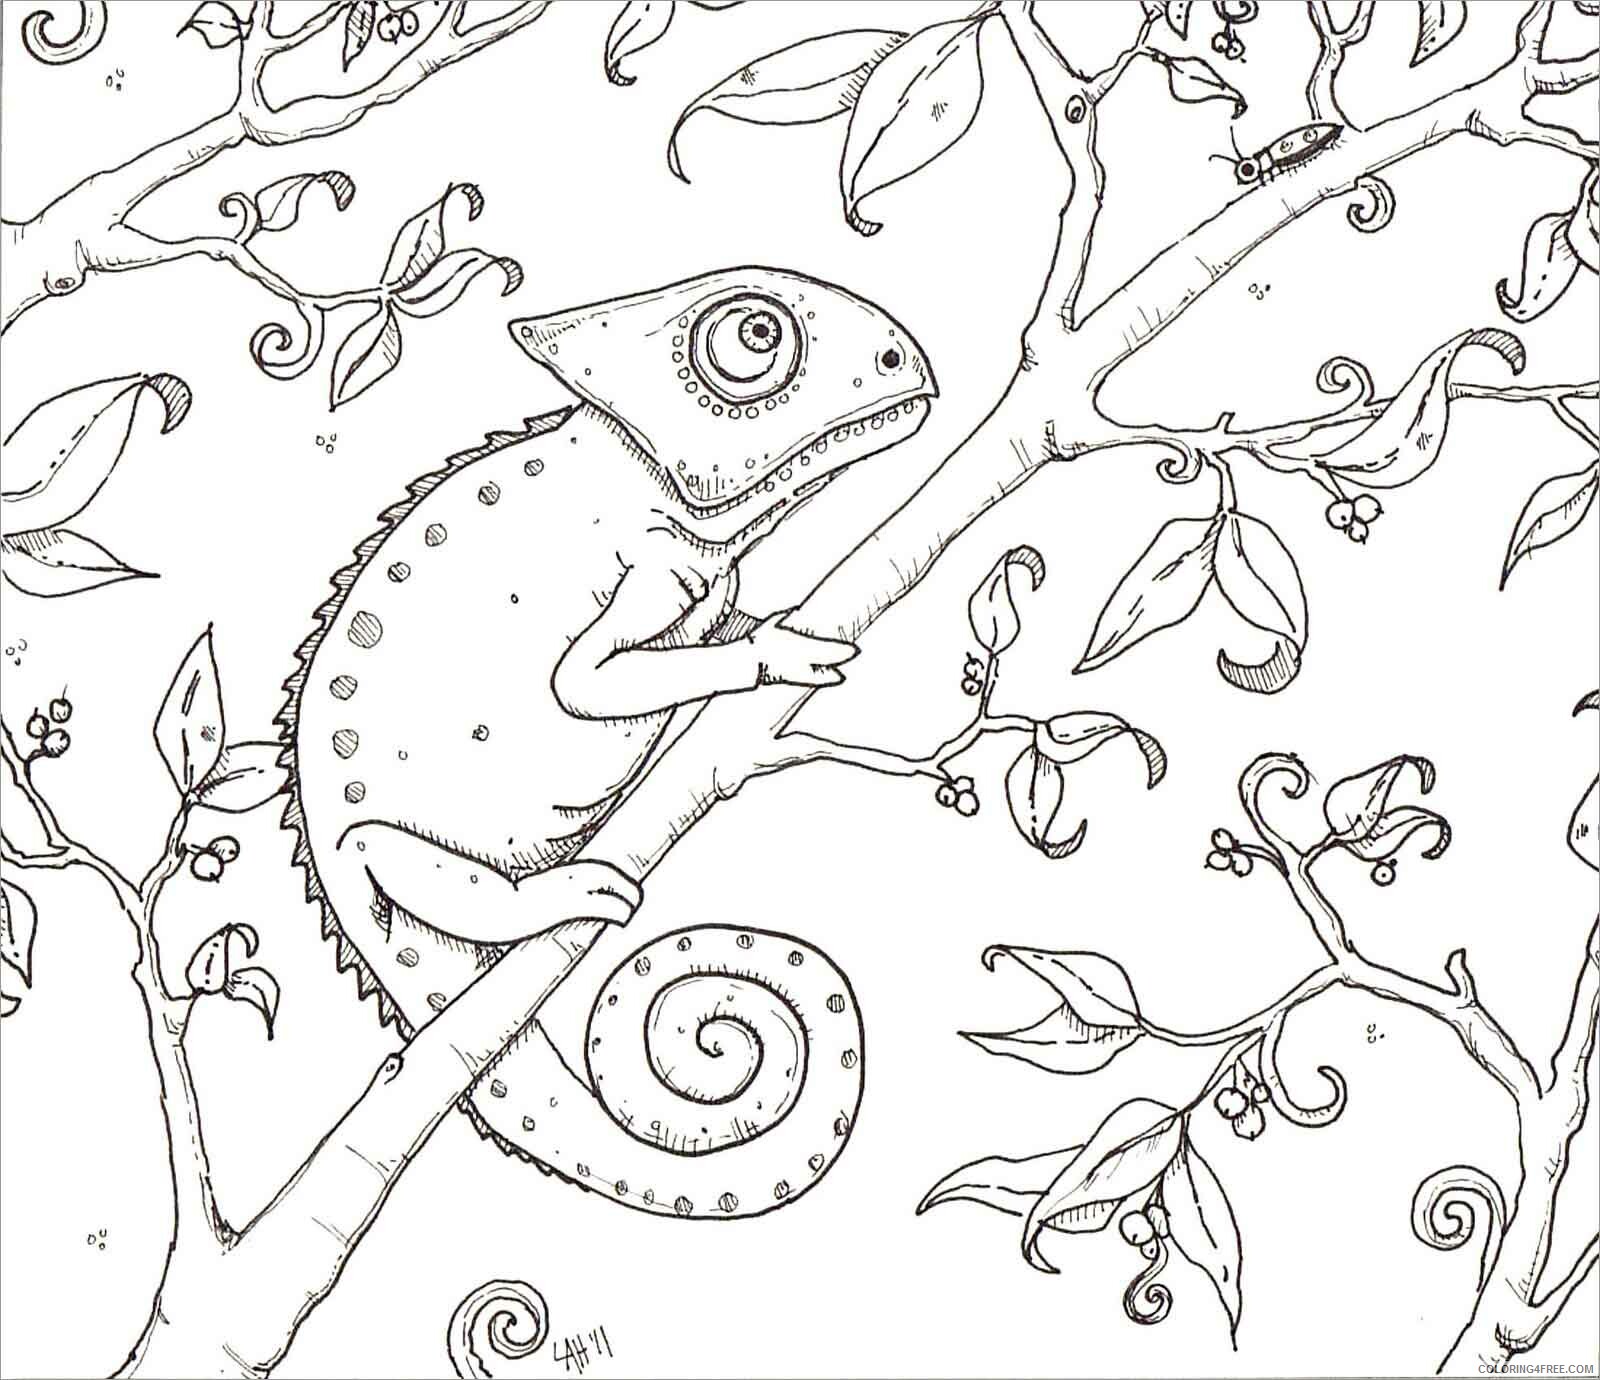 Chameleon Coloring Pages Animal Printable Sheets chameleon lives on tree 2021 Coloring4free